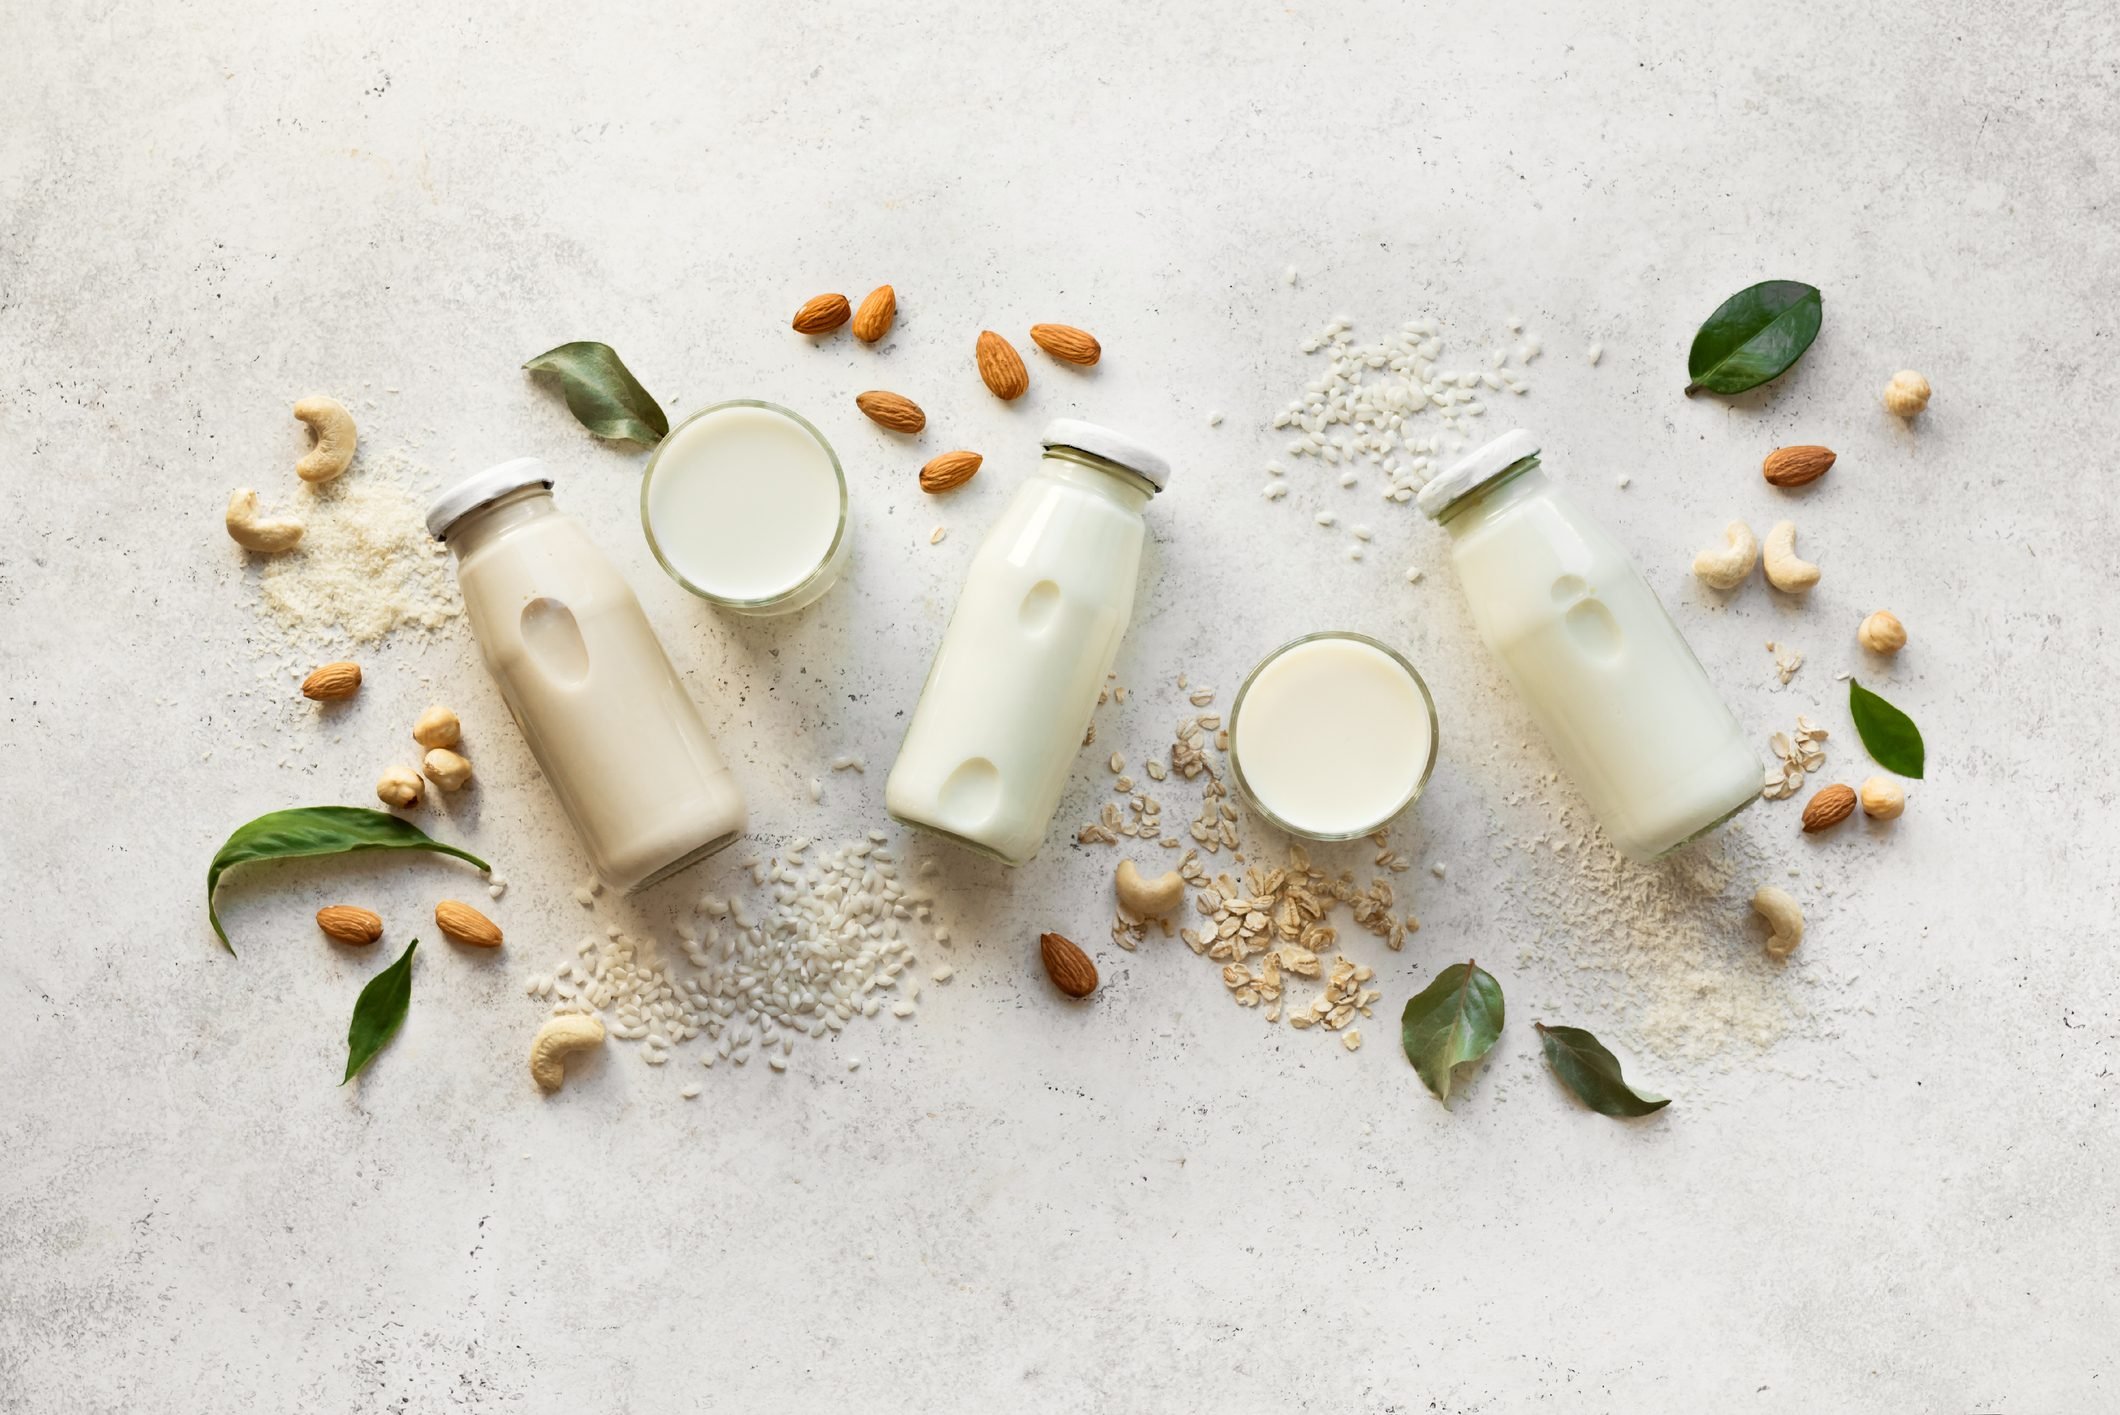 Cashew Milk vs. Almond Milk: What's the Difference? | The Healthy